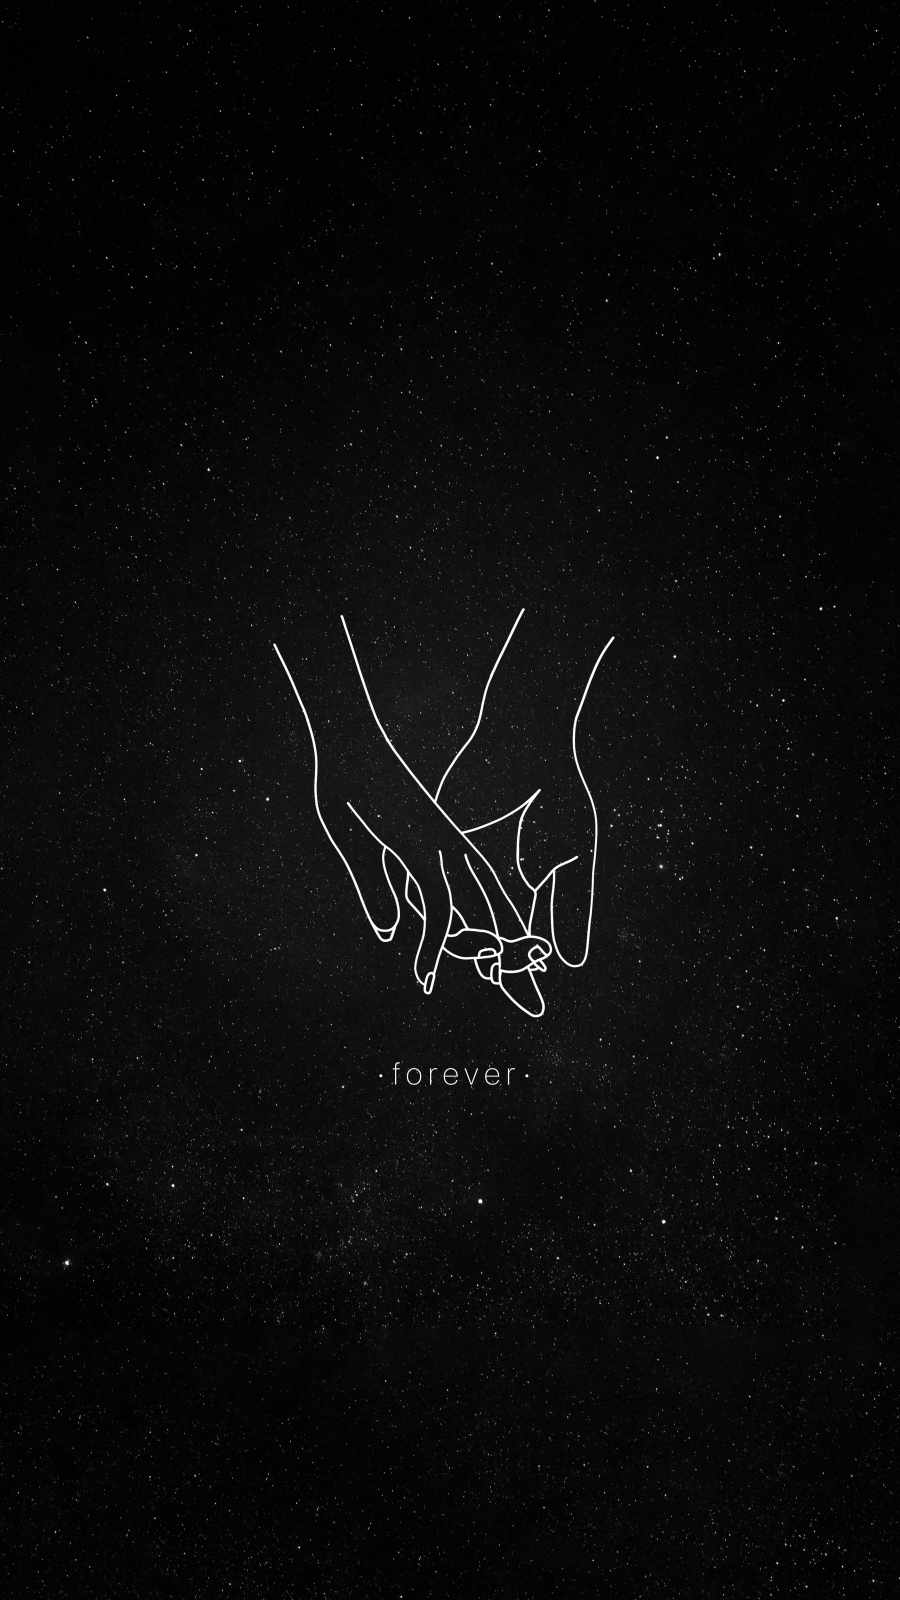 Forever Love Wallpapers